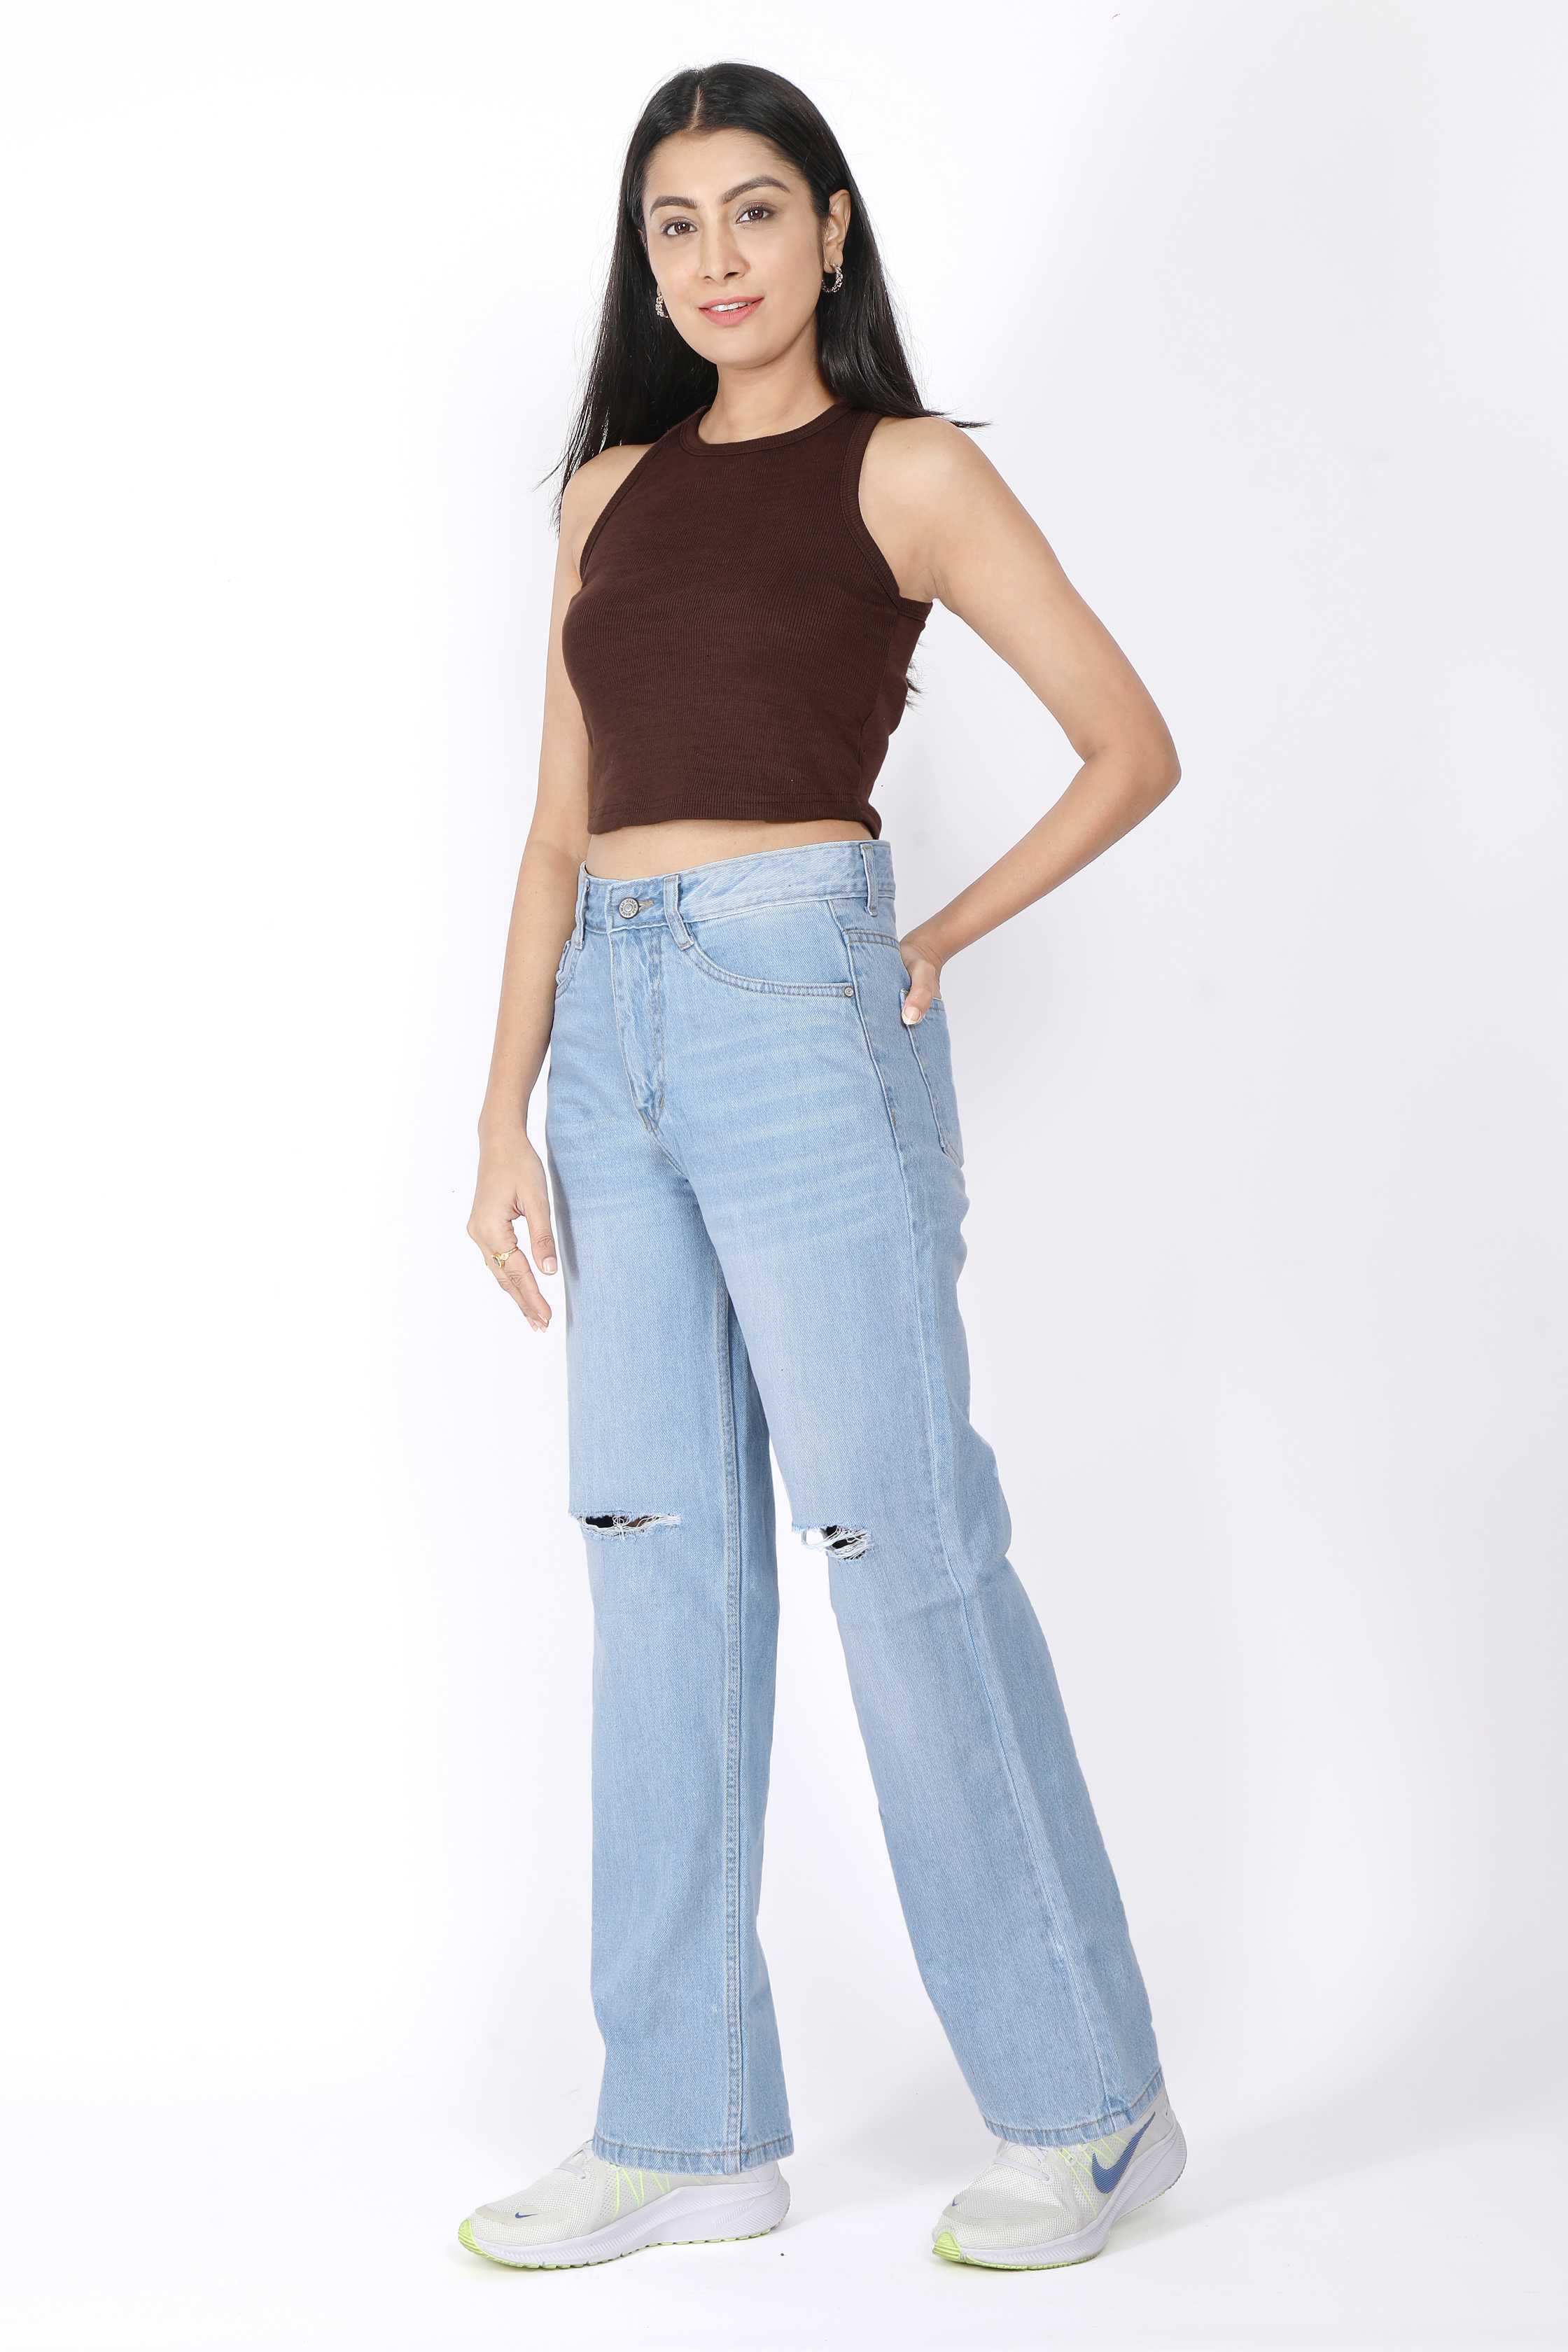 Ripped Denim High Rise Jeans For Women